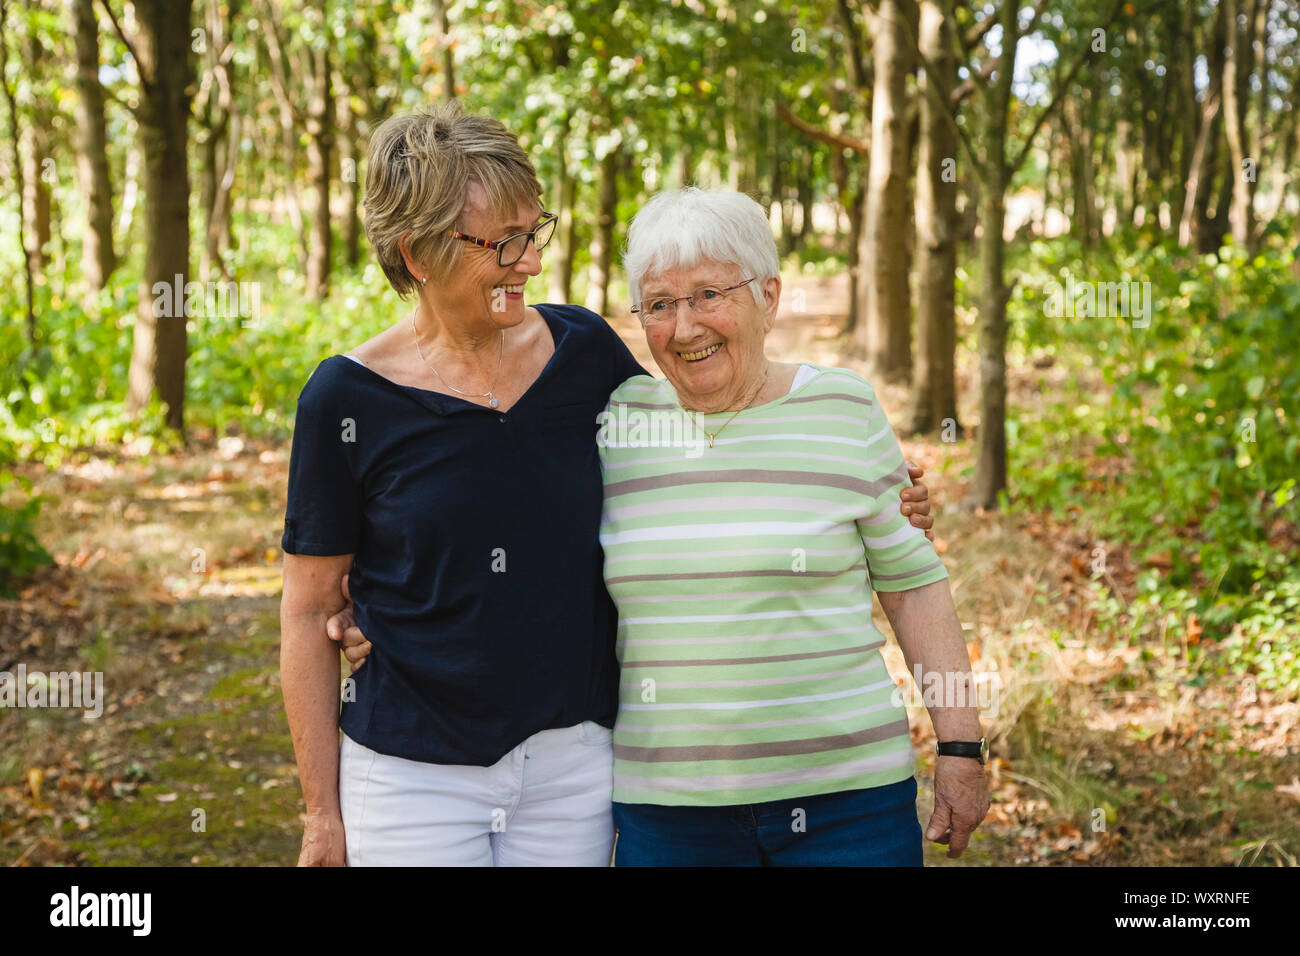 Very old joyful senior lady with her daughter walking embraced in a beautiful park, happy for being together Stock Photo